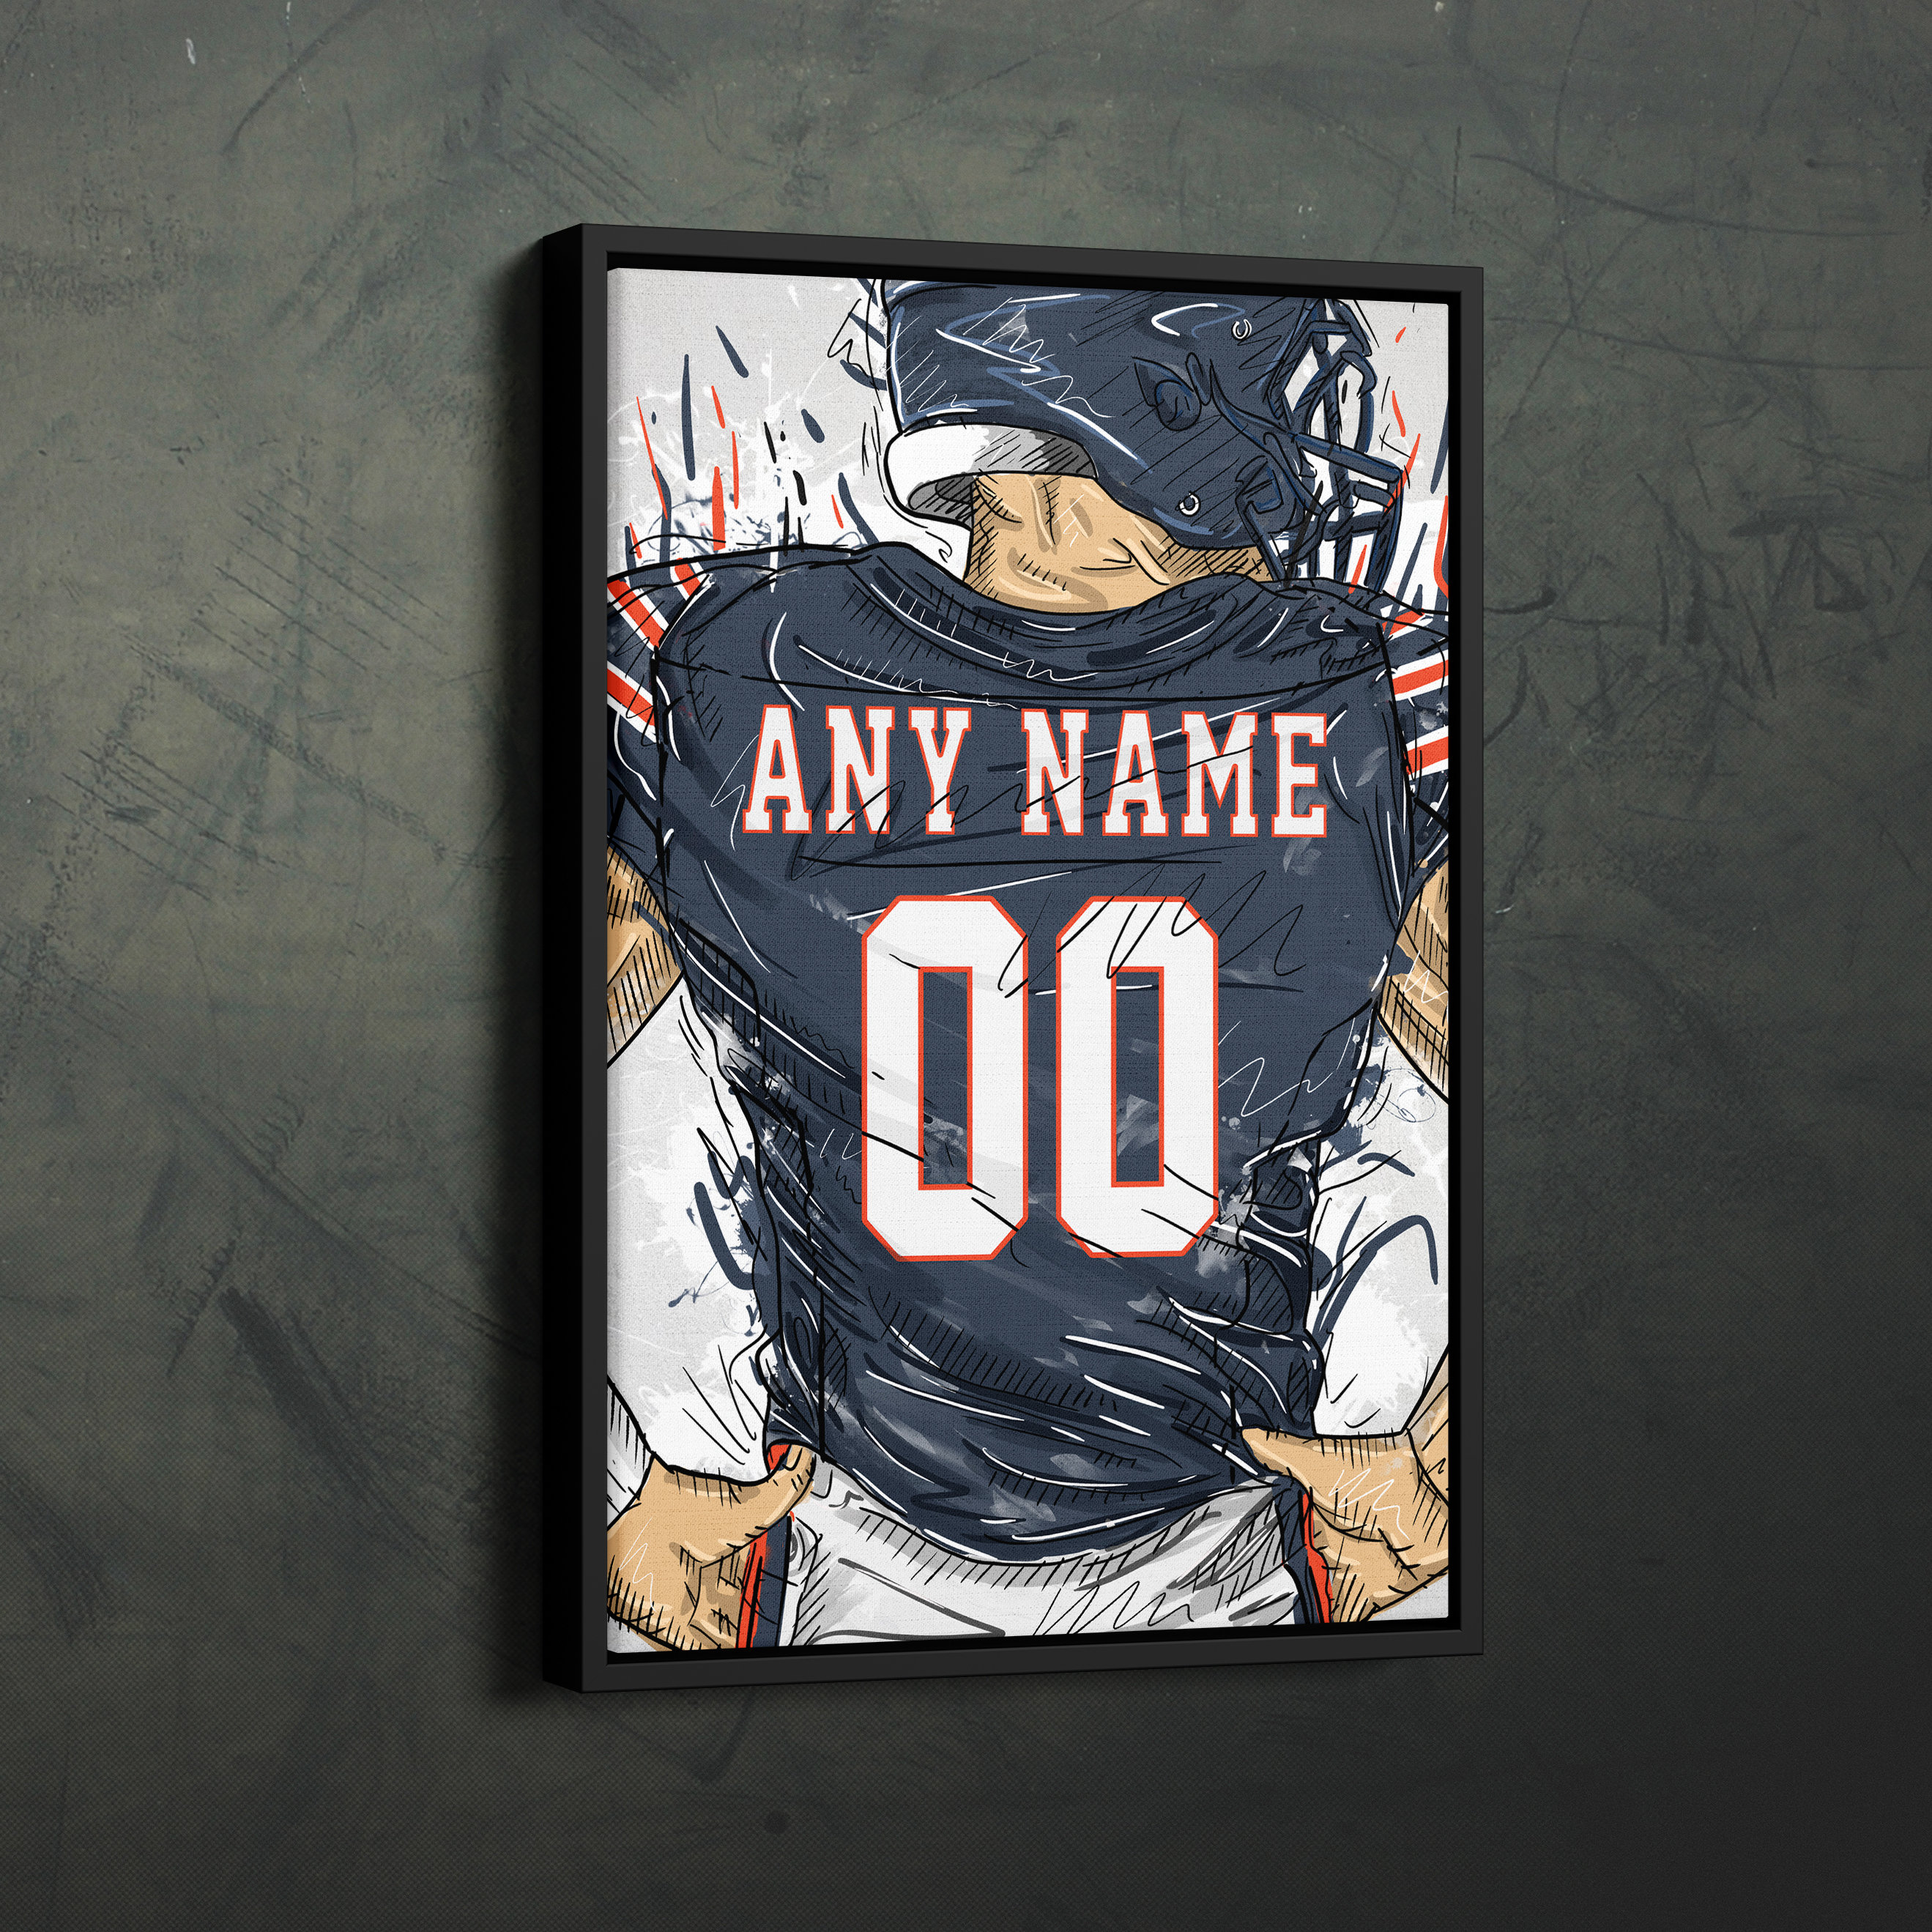 Nike Chicago Bears Customized Navy Blue Team Color Stitched Vapor Untouchable Limited Youth NFL Jersey